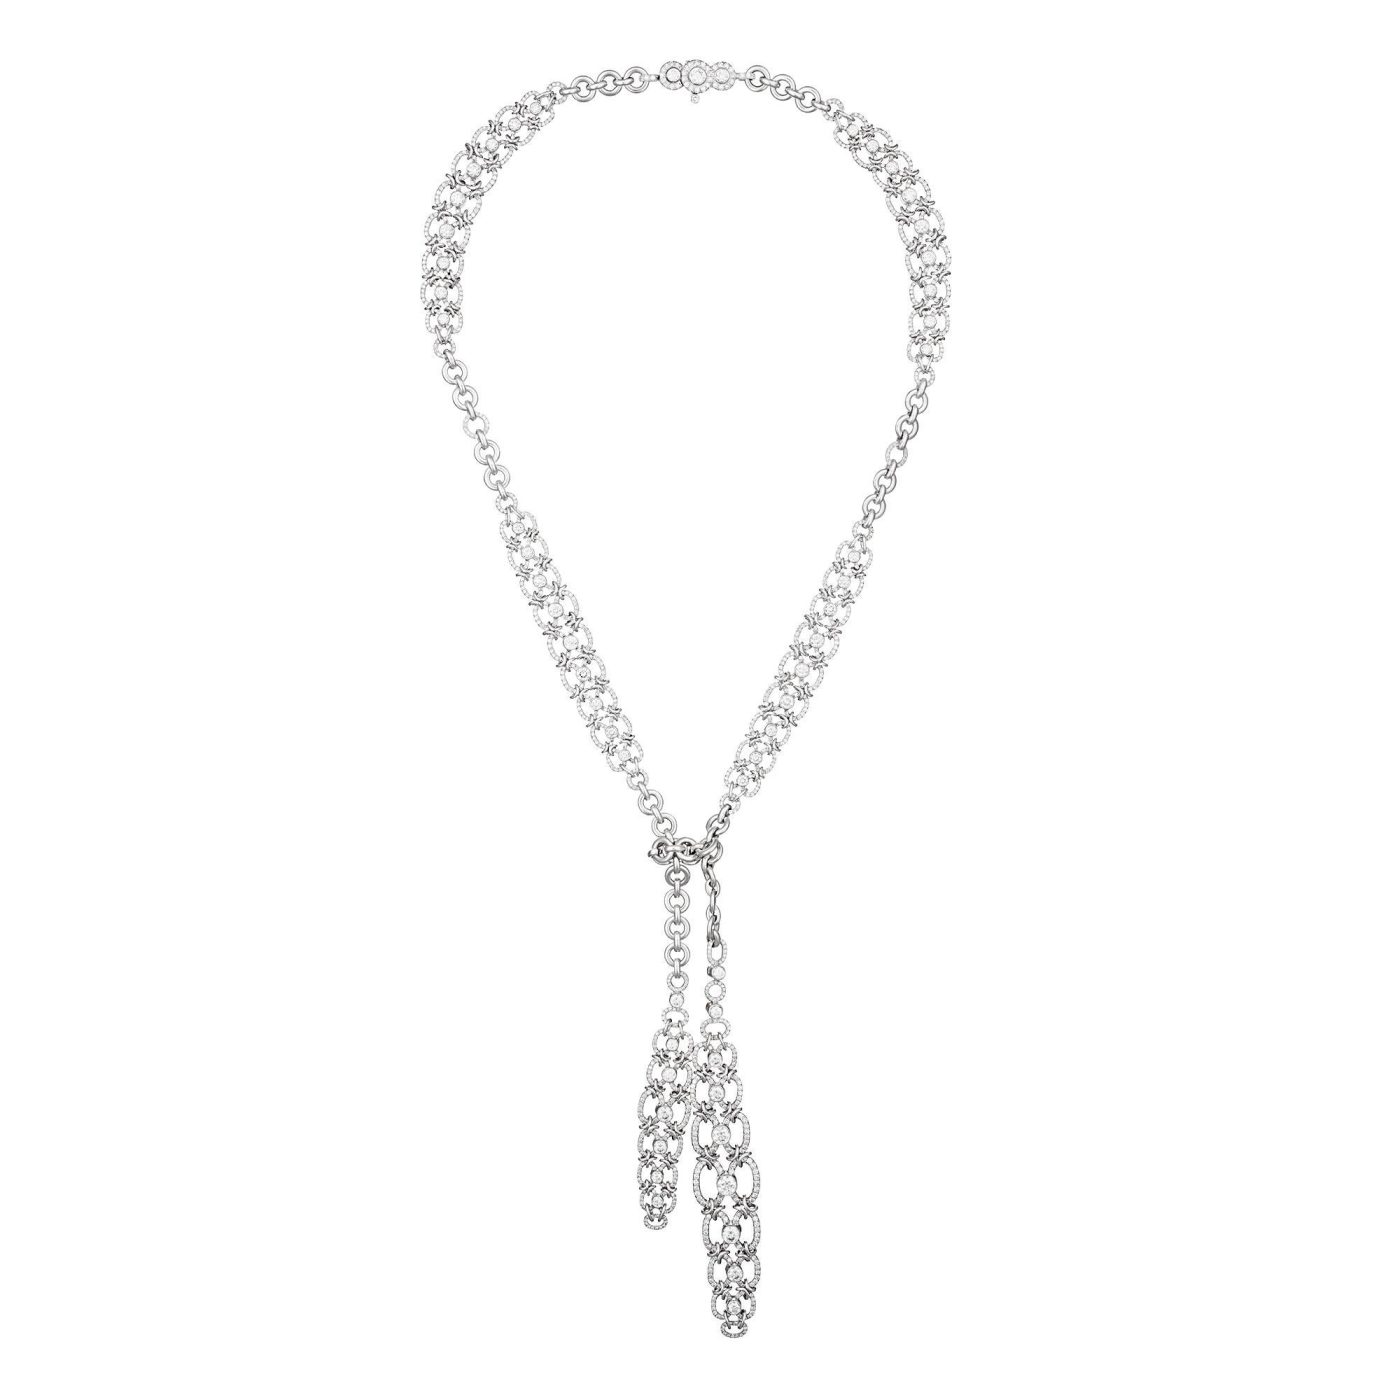 White gold lariat necklace with 11.78 carats of diamonds